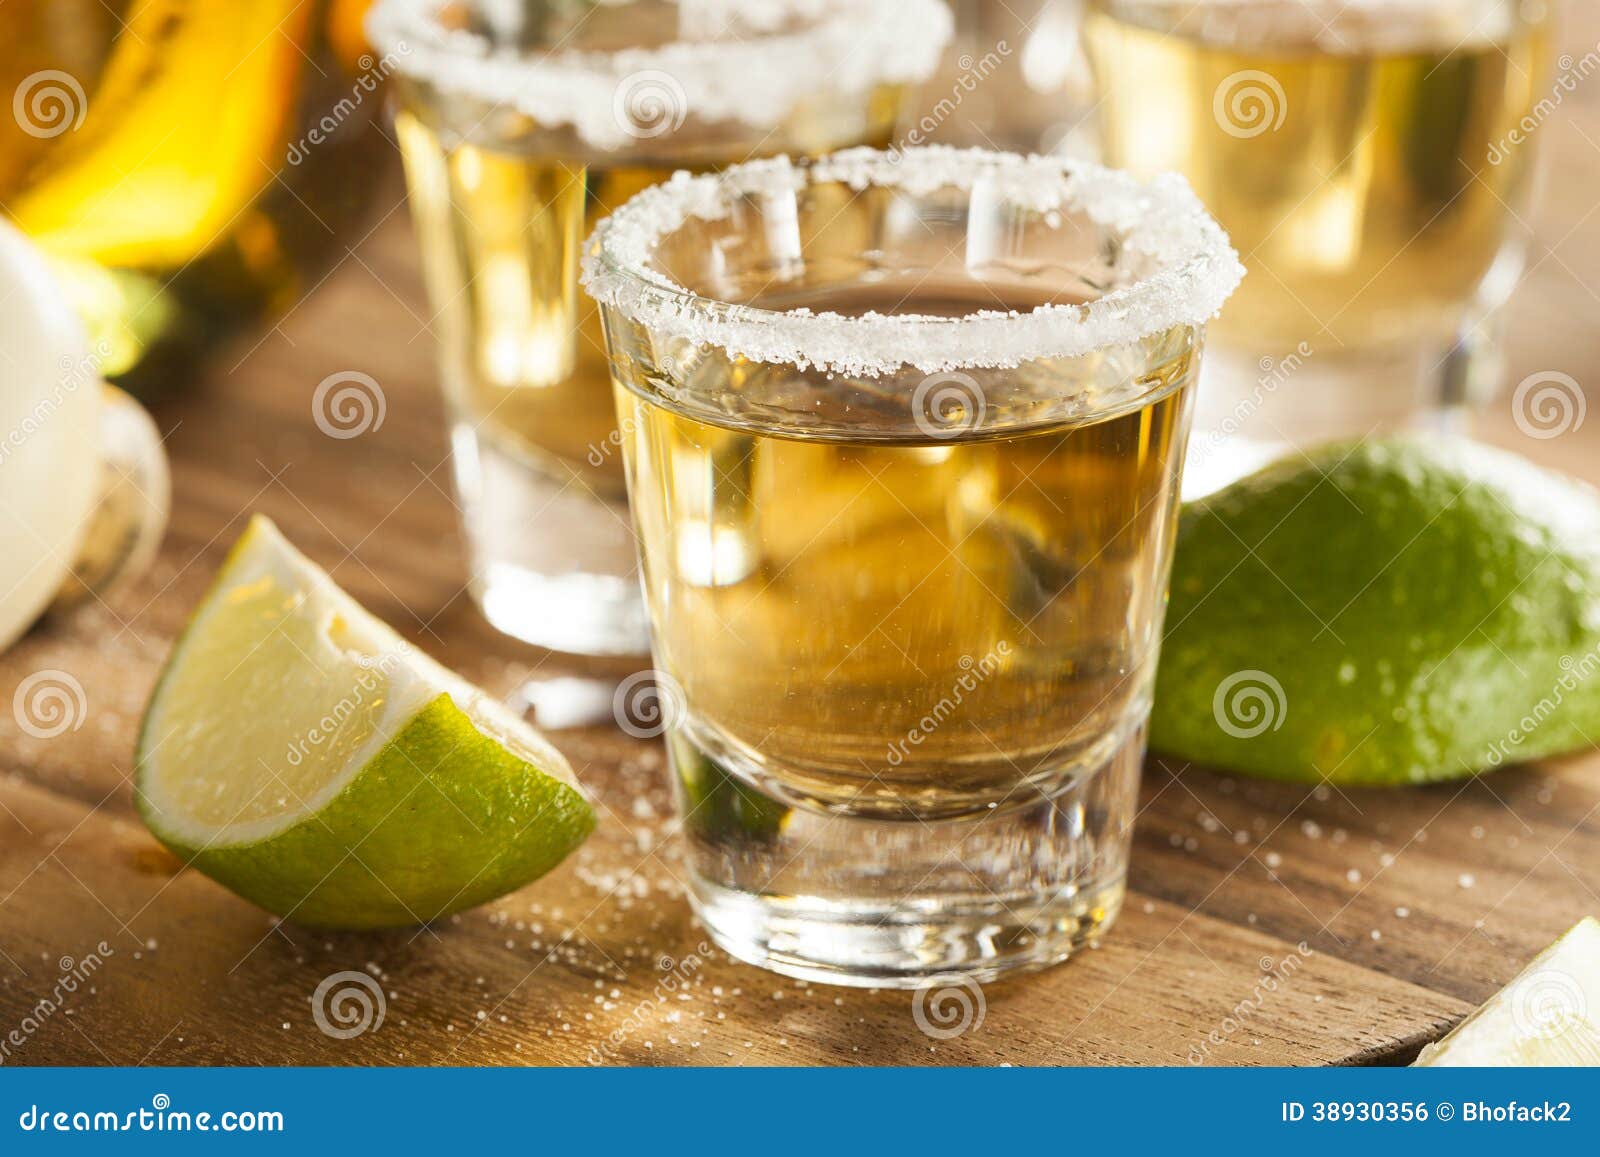 Tequila Shots with Lime and Salt Stock Photo - Image of liquid, drink ...